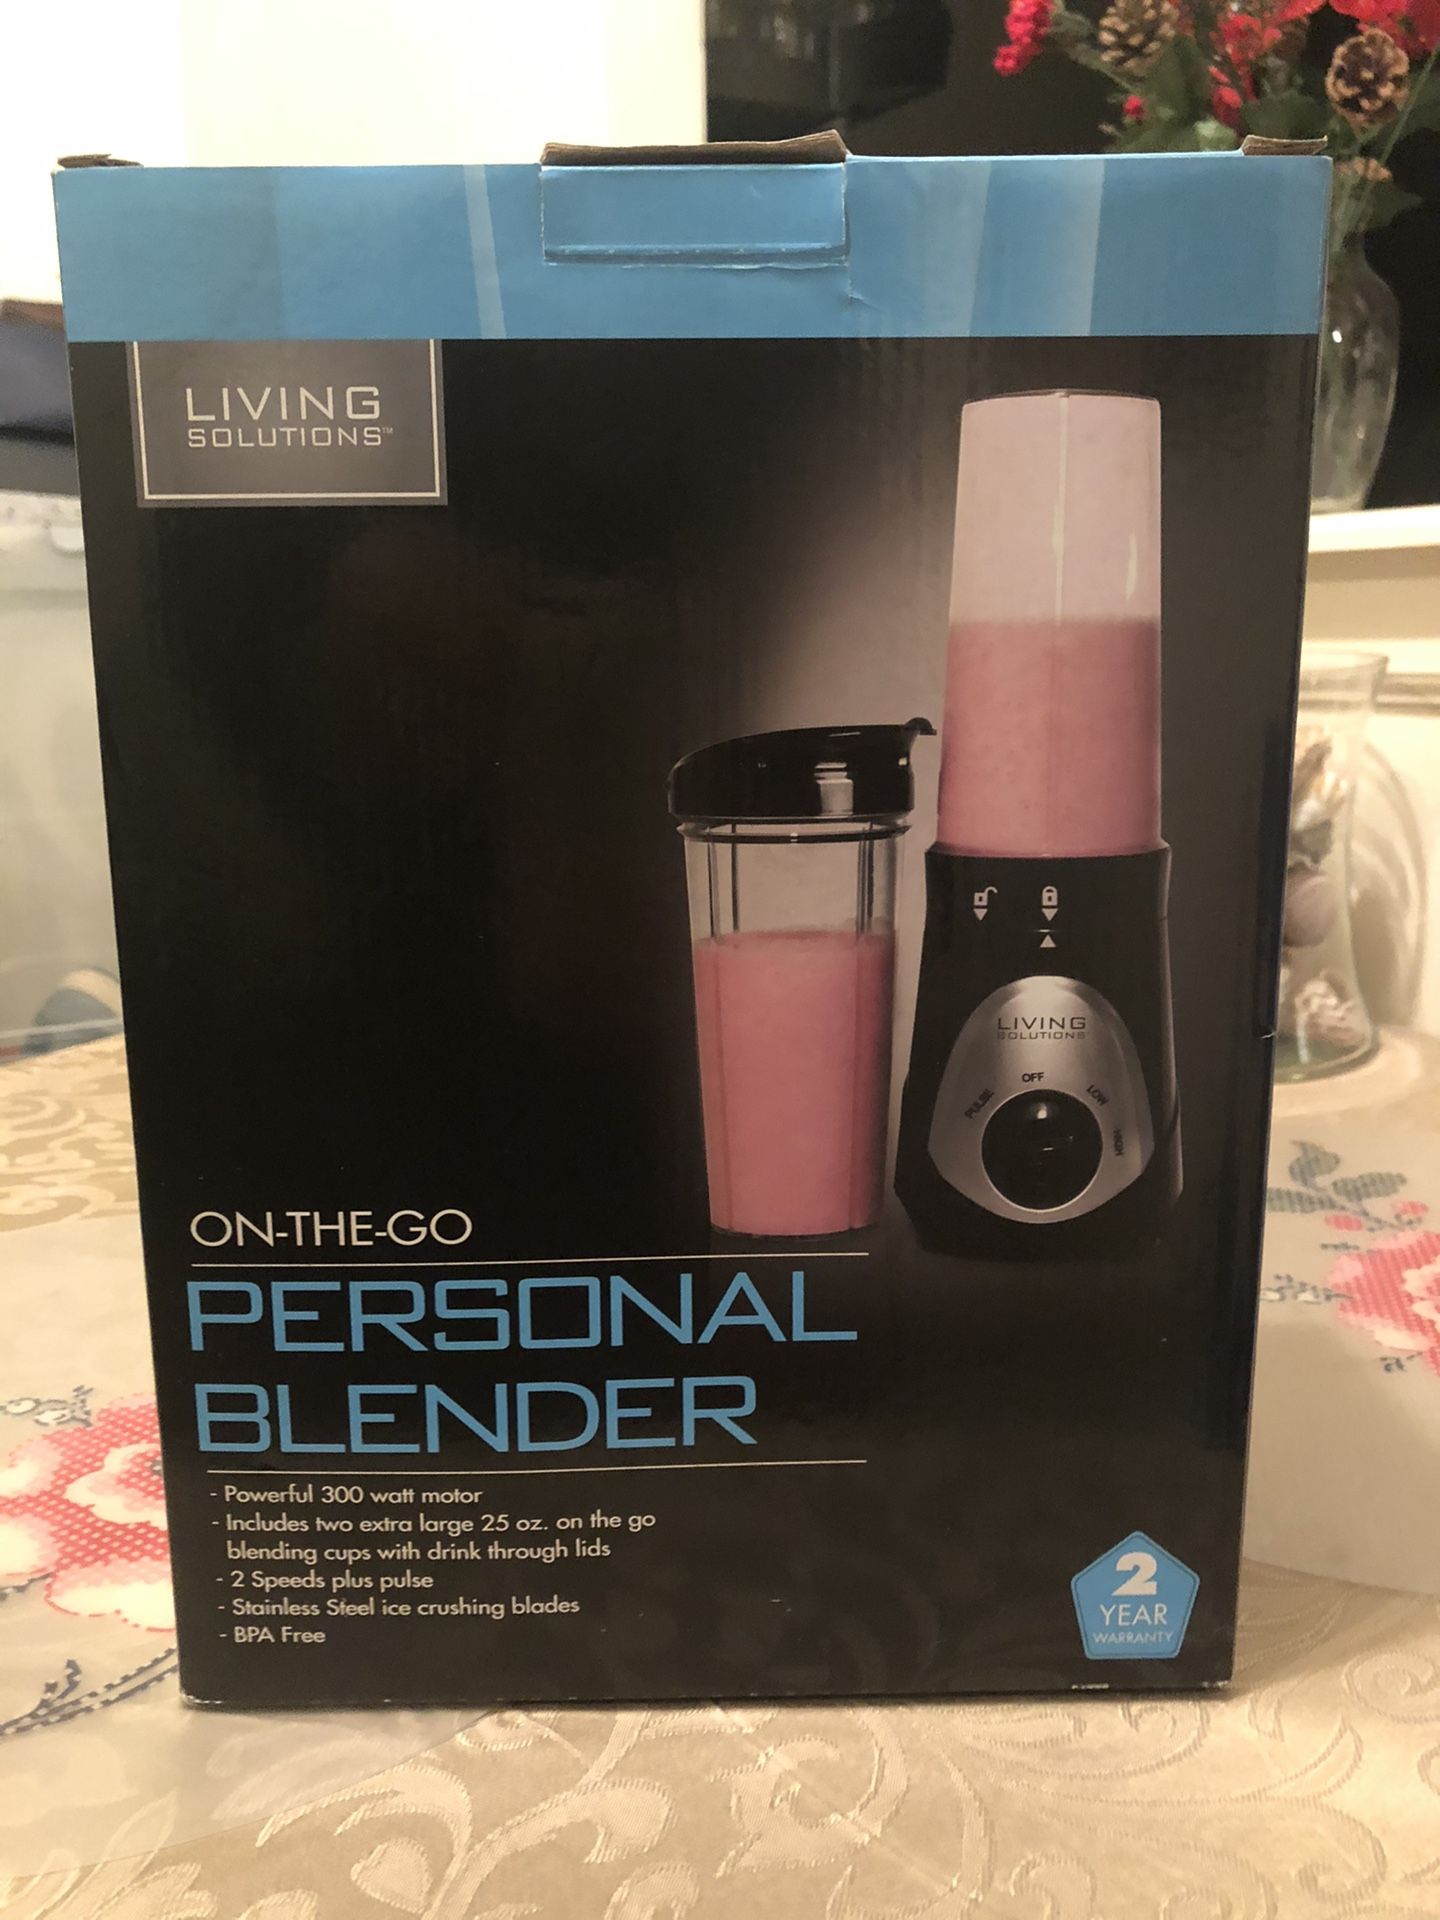 On the go Personal Blender